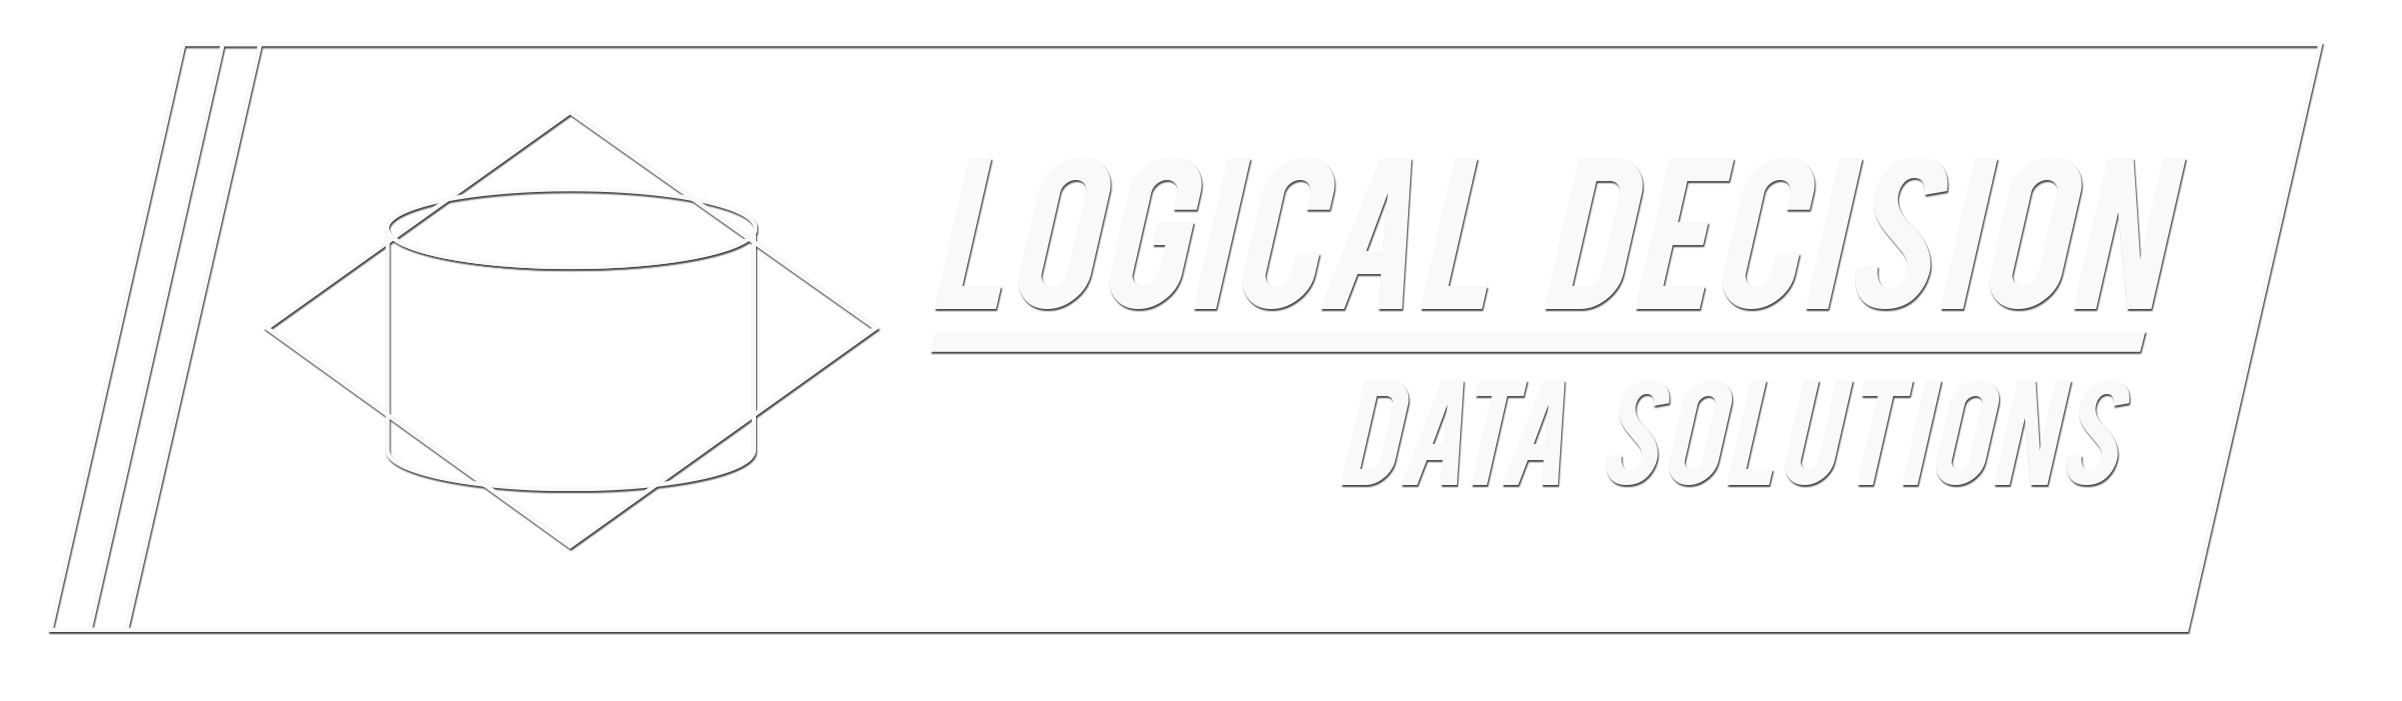 Logical Decision | Data Solutions